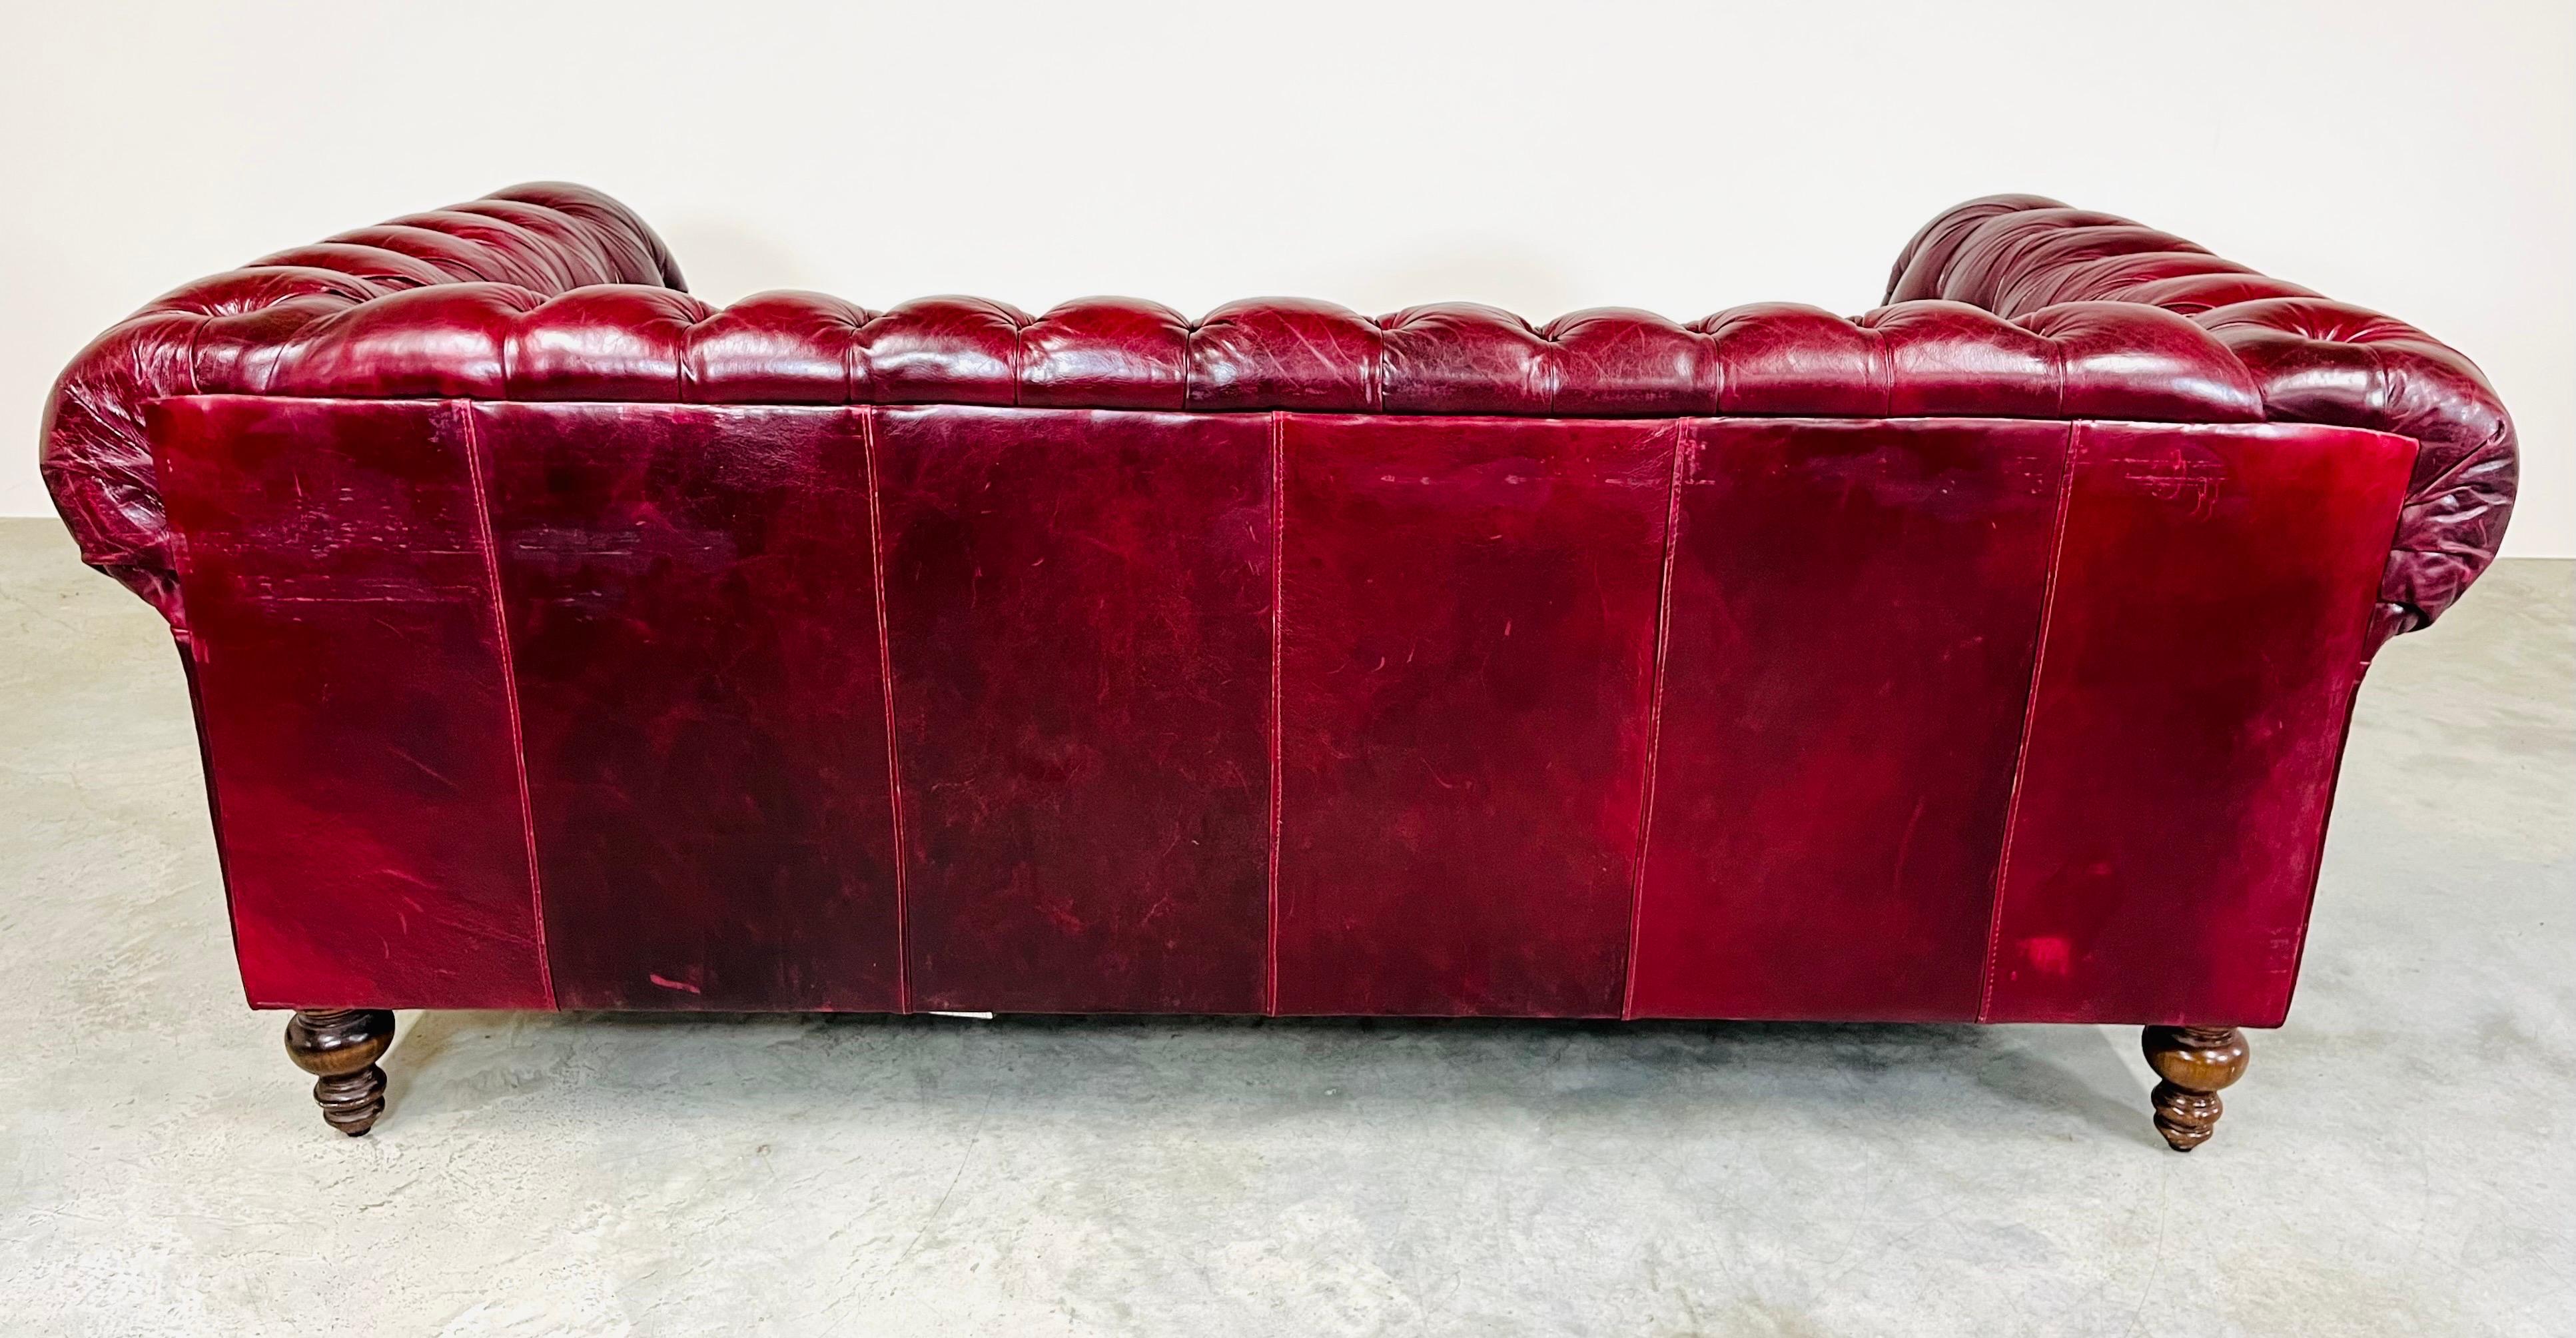 Contemporary English Style Chesterfield Cordovan Oxblood Tufted Leather Sofa